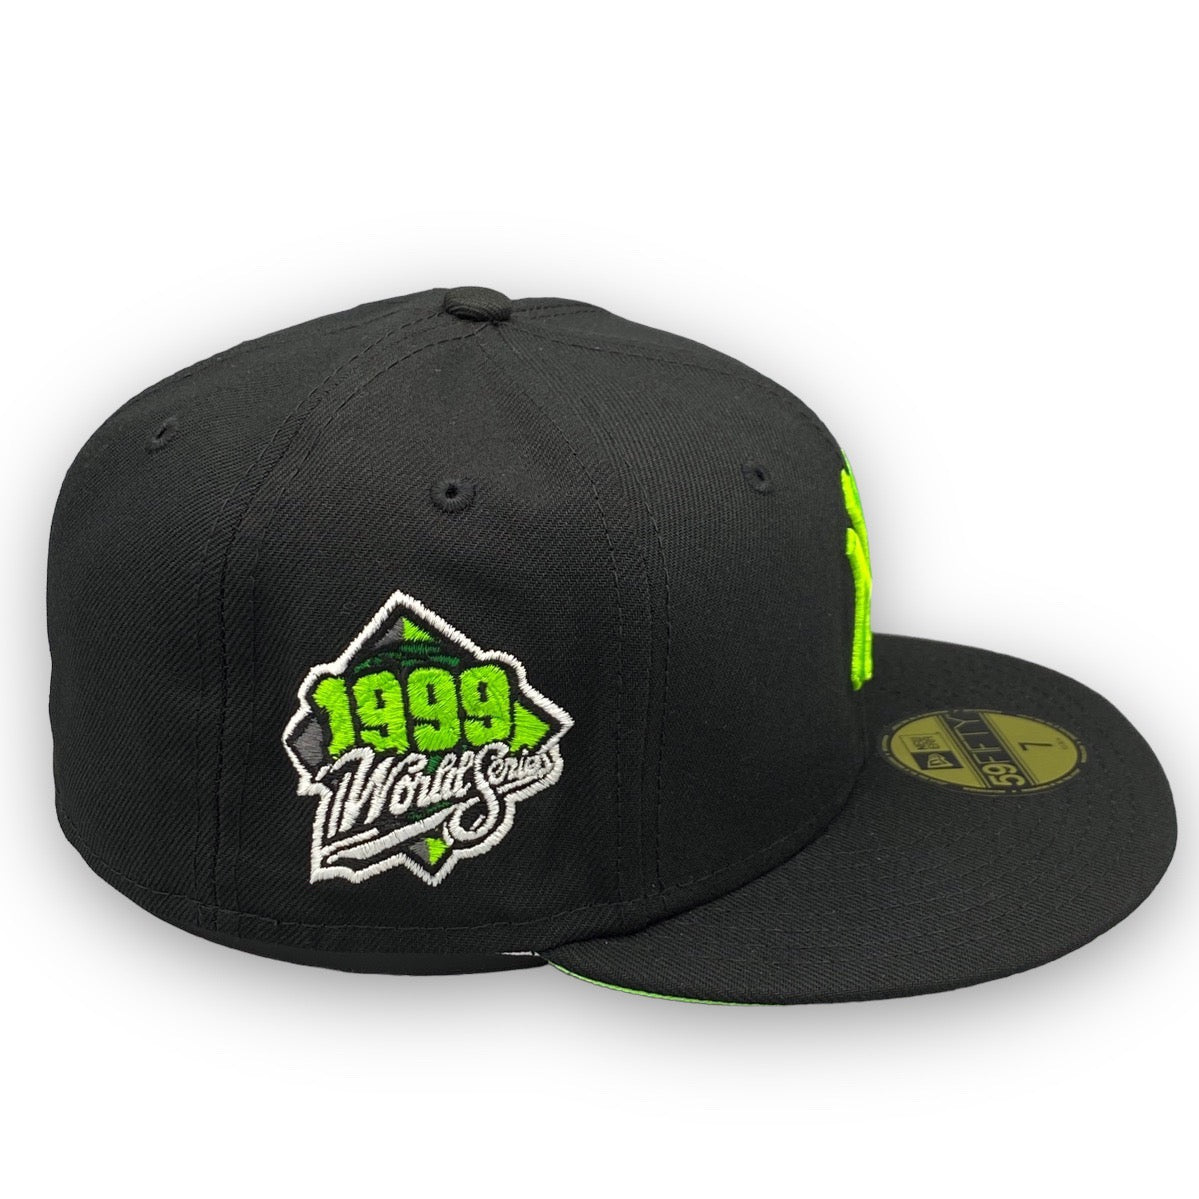 NY Yankees Basic New Era 59FIFTY Black & Neon Green Fitted Hat